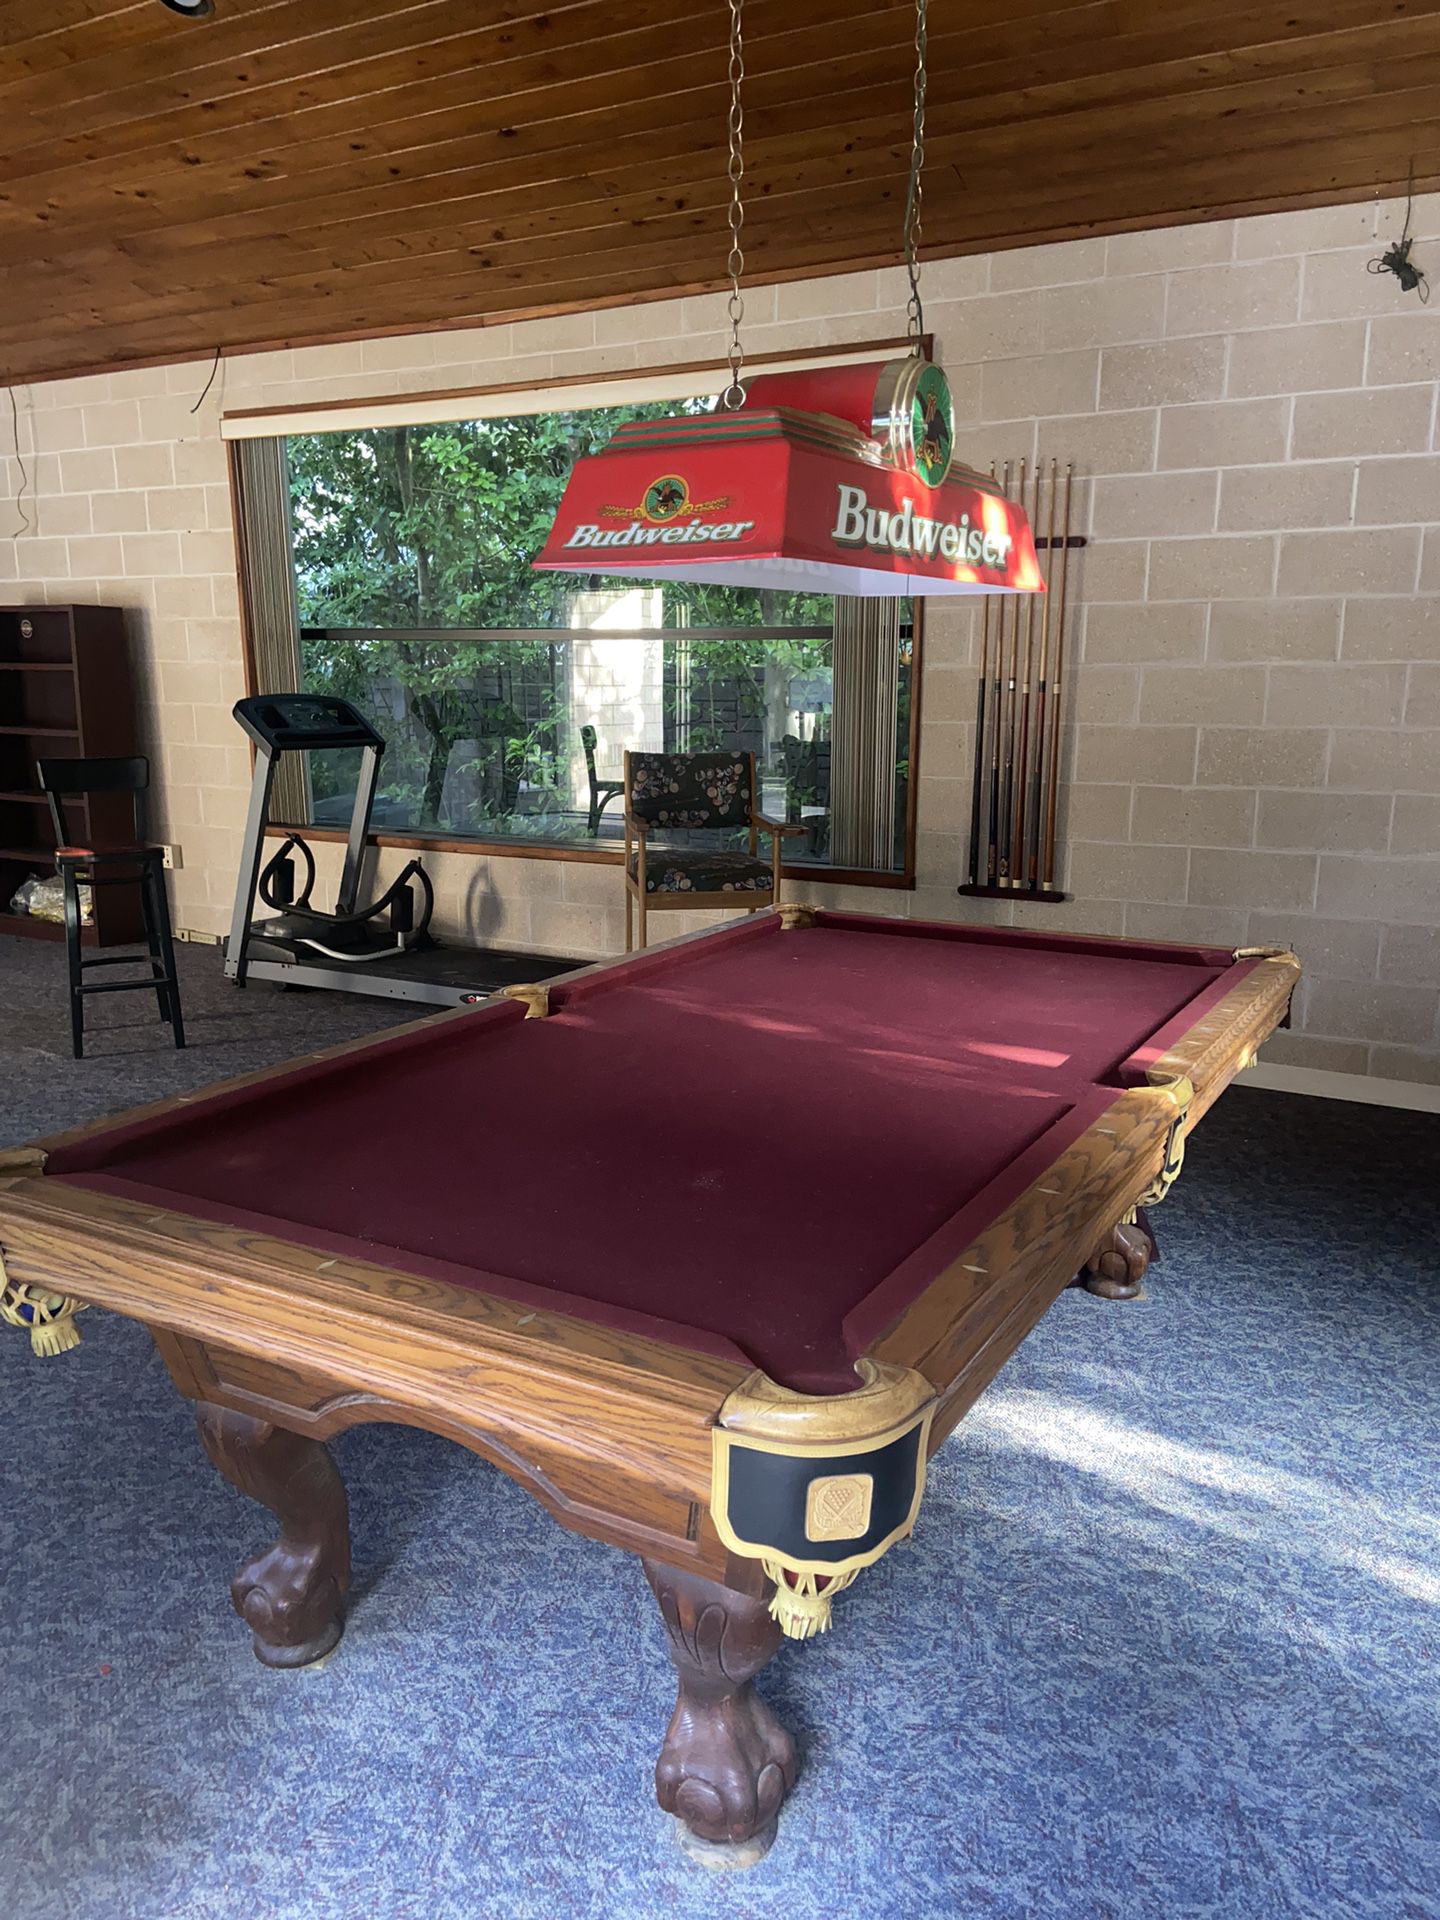 Vintage Leisure Bay Pool Table With Lots Of Extras